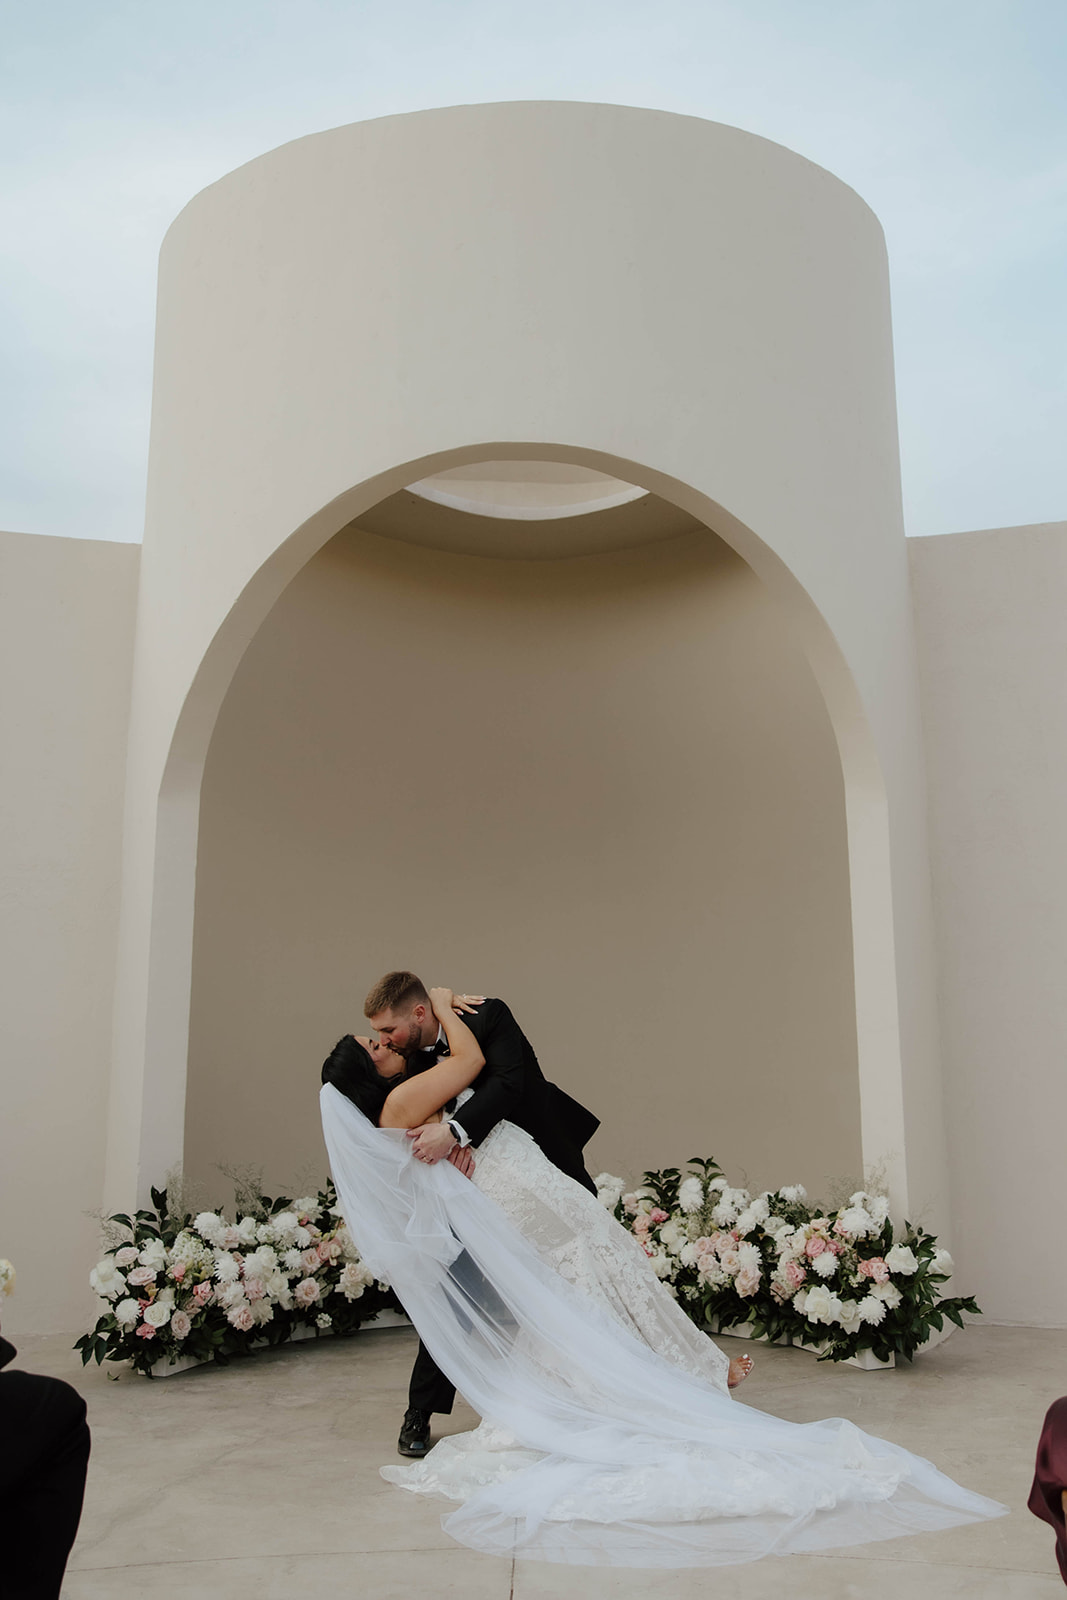 Bride and groom sharing their first kiss beneath an archway with floral decorations at a Cabo San Lucas wedding